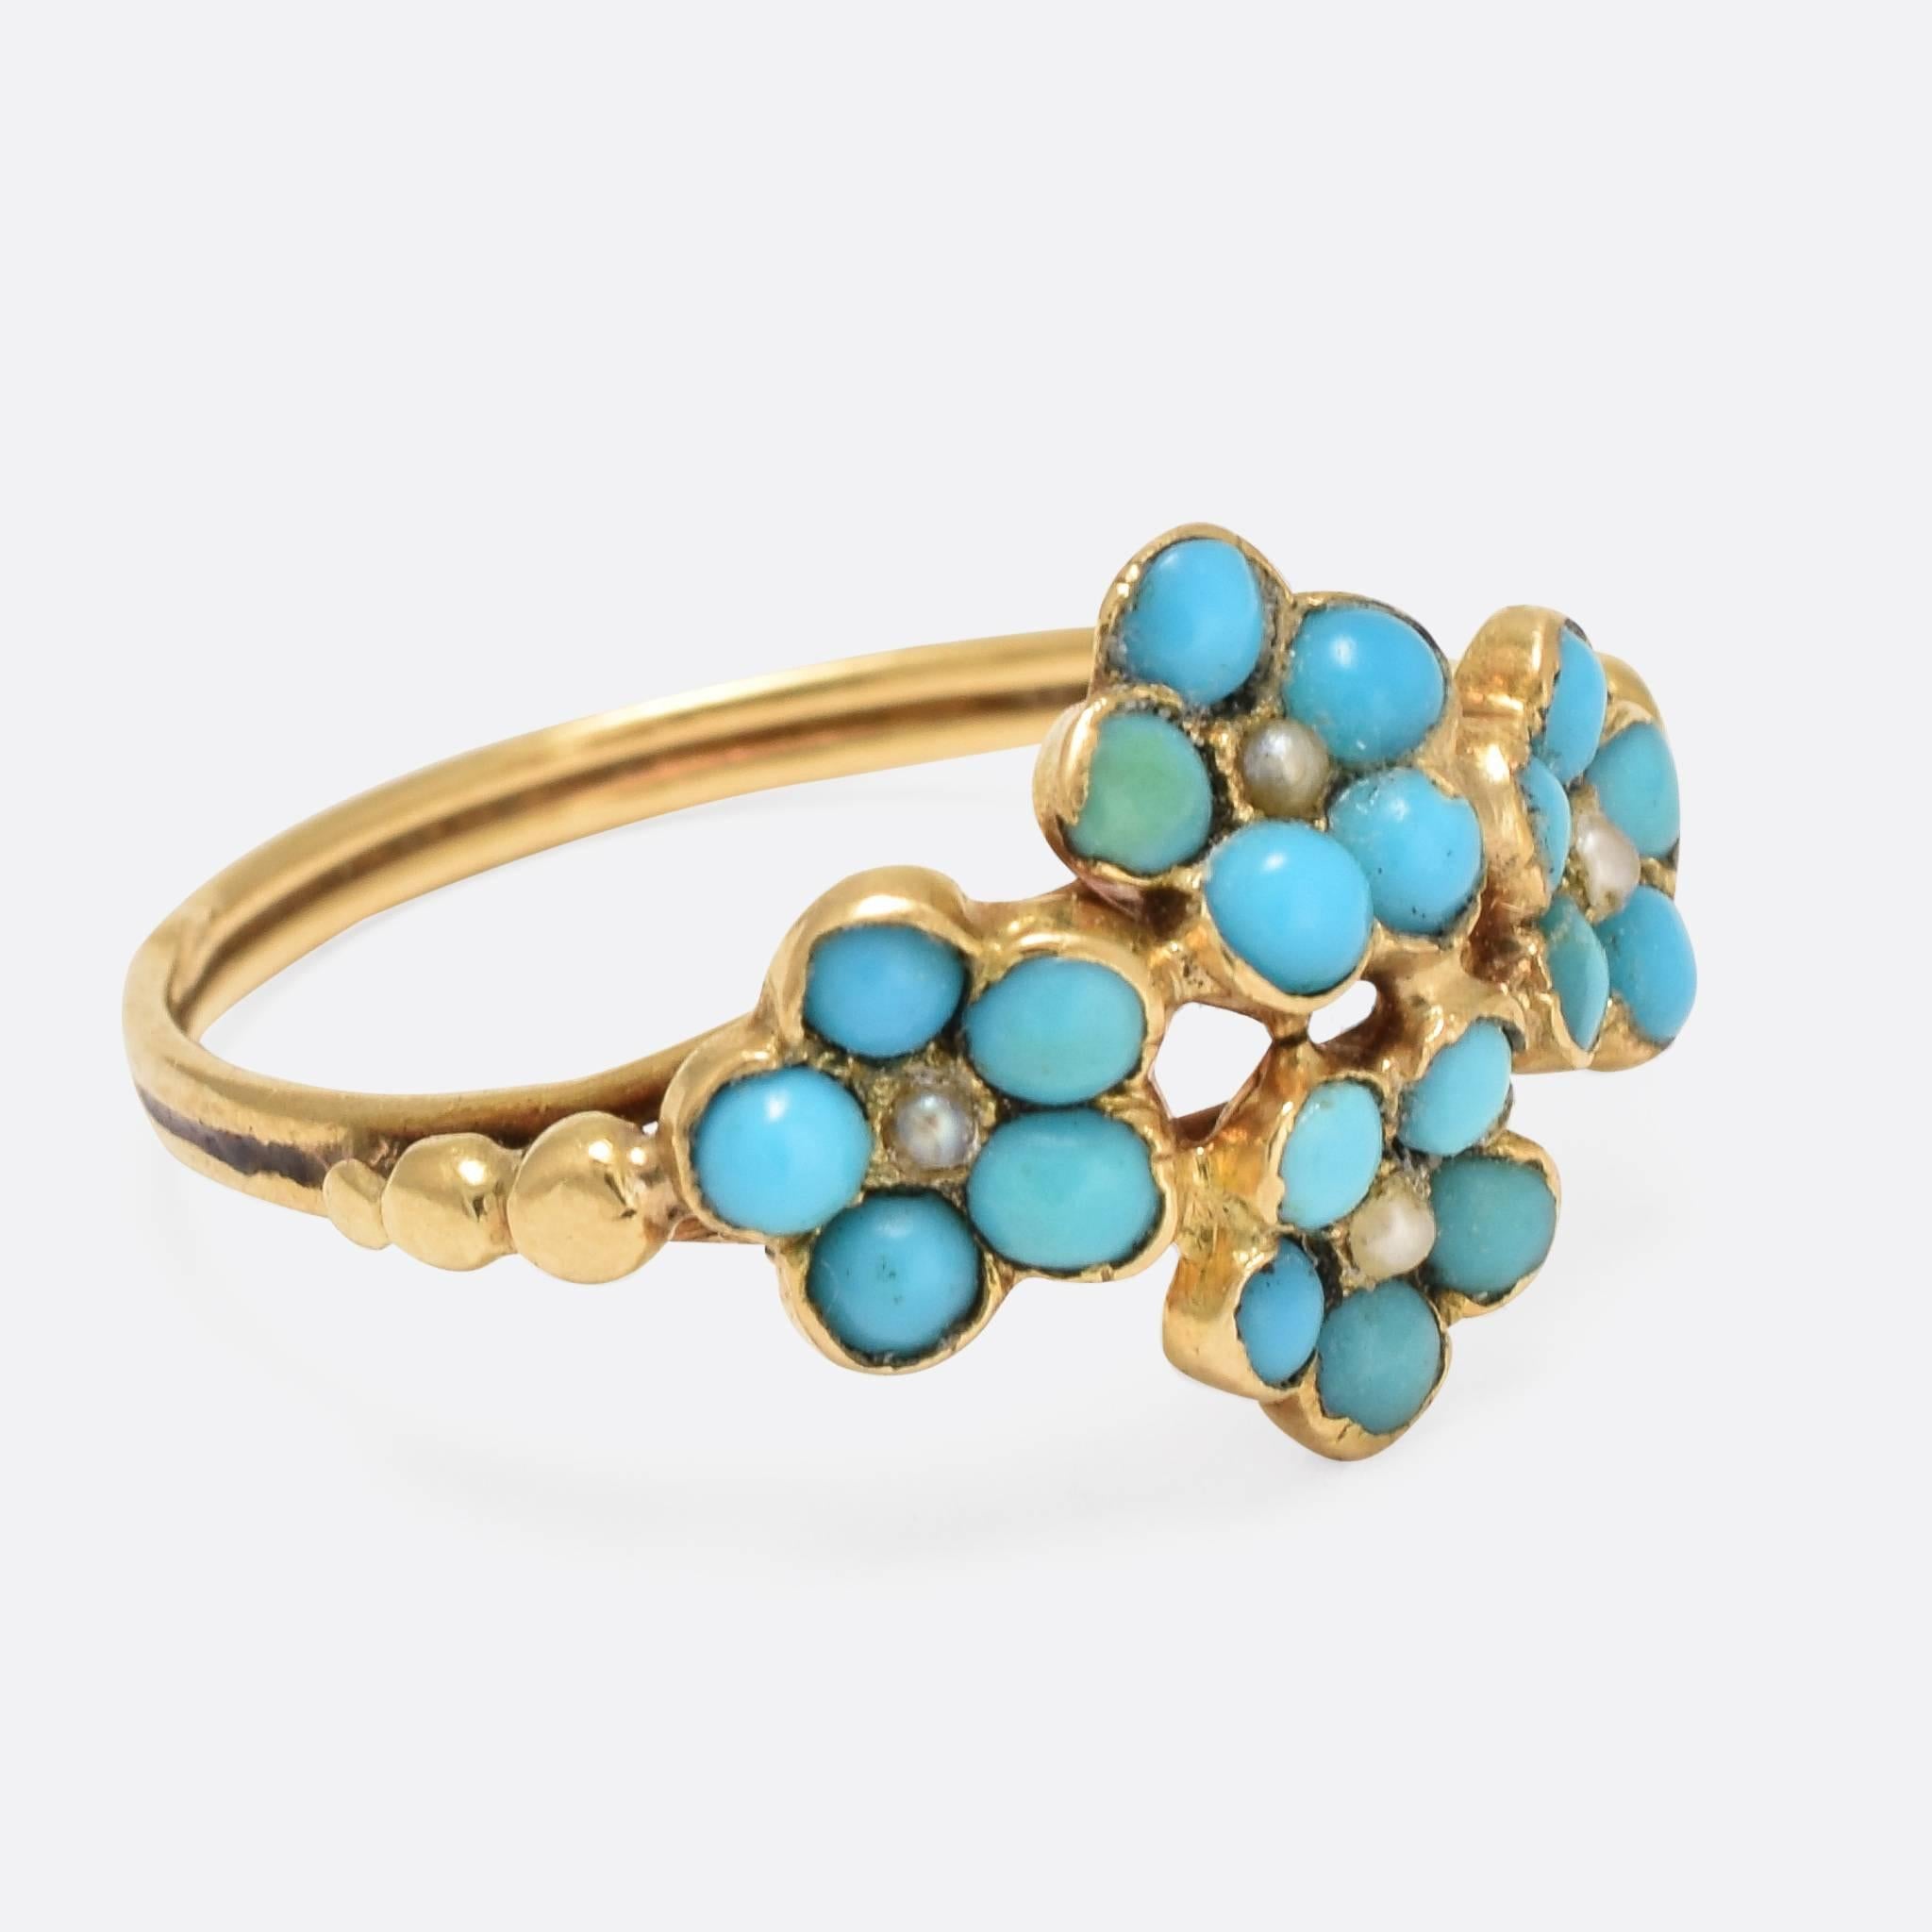 This pretty antique ring was made in France in the latter part of the 19th Century. The head features four flowers, each set with a pleasing cluster of turquoise cabochons and seed pearls. The twin band holds nice pommel detail on the shoulders, and